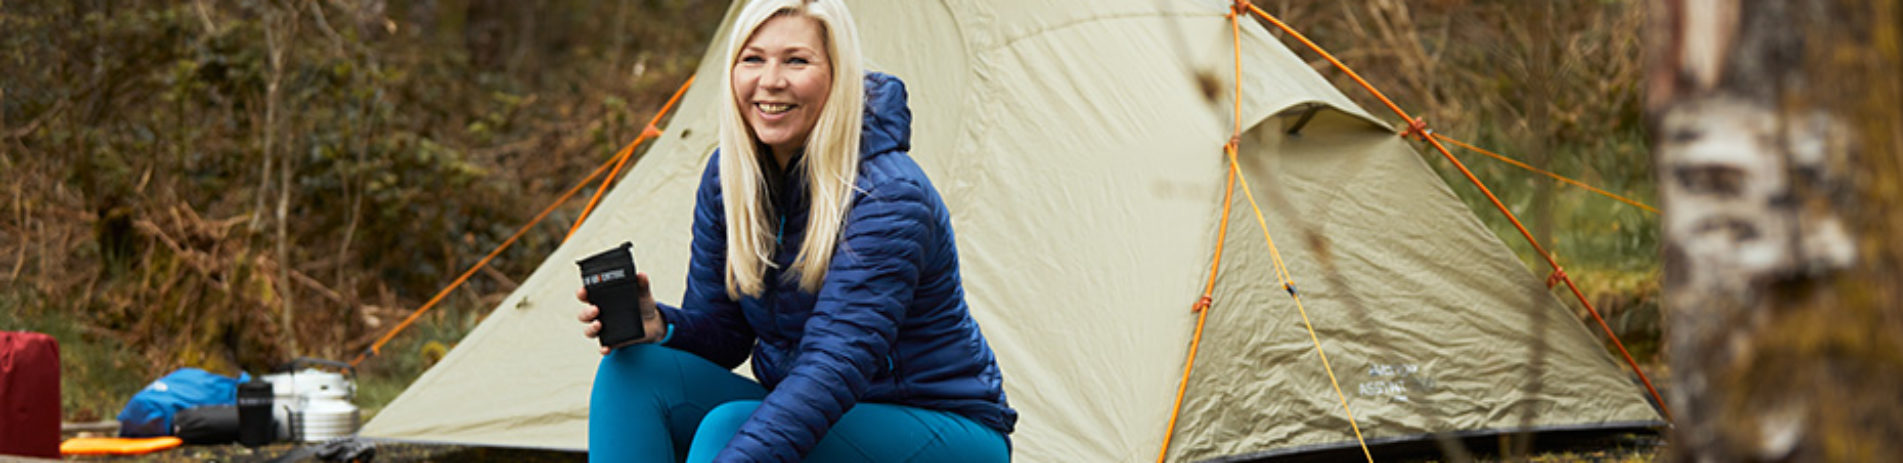 blonde-woman-smiling-in-front-of-tent